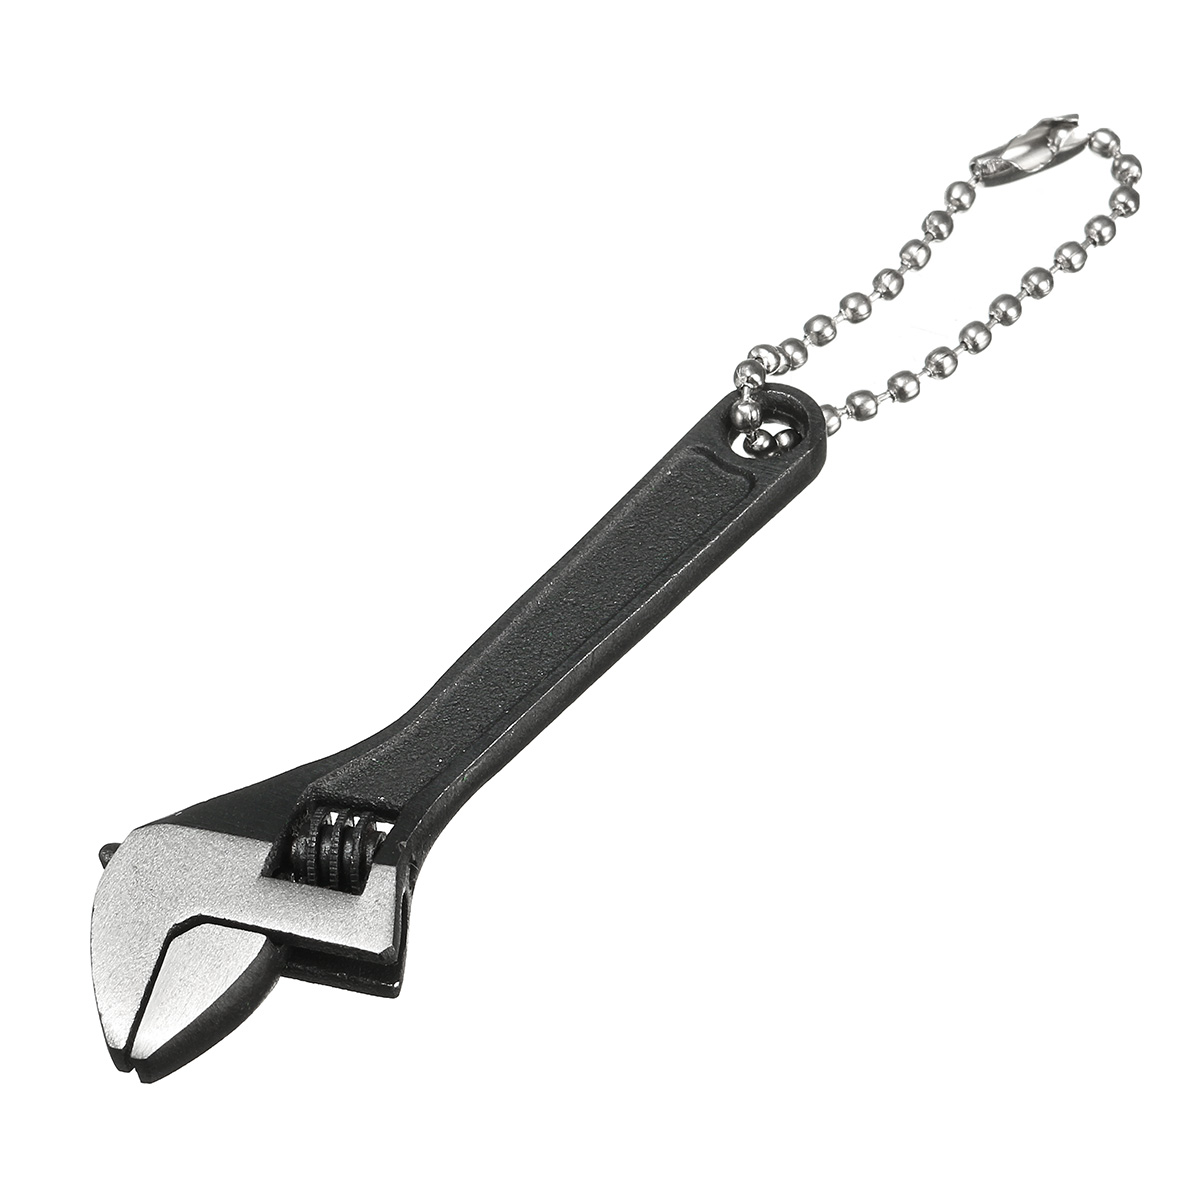 25inch-Mini-Metal-Adjustable-Wrench-Hand-Tool-0-10mm-Jaw-Spanner-Carbon-Steel-1081280